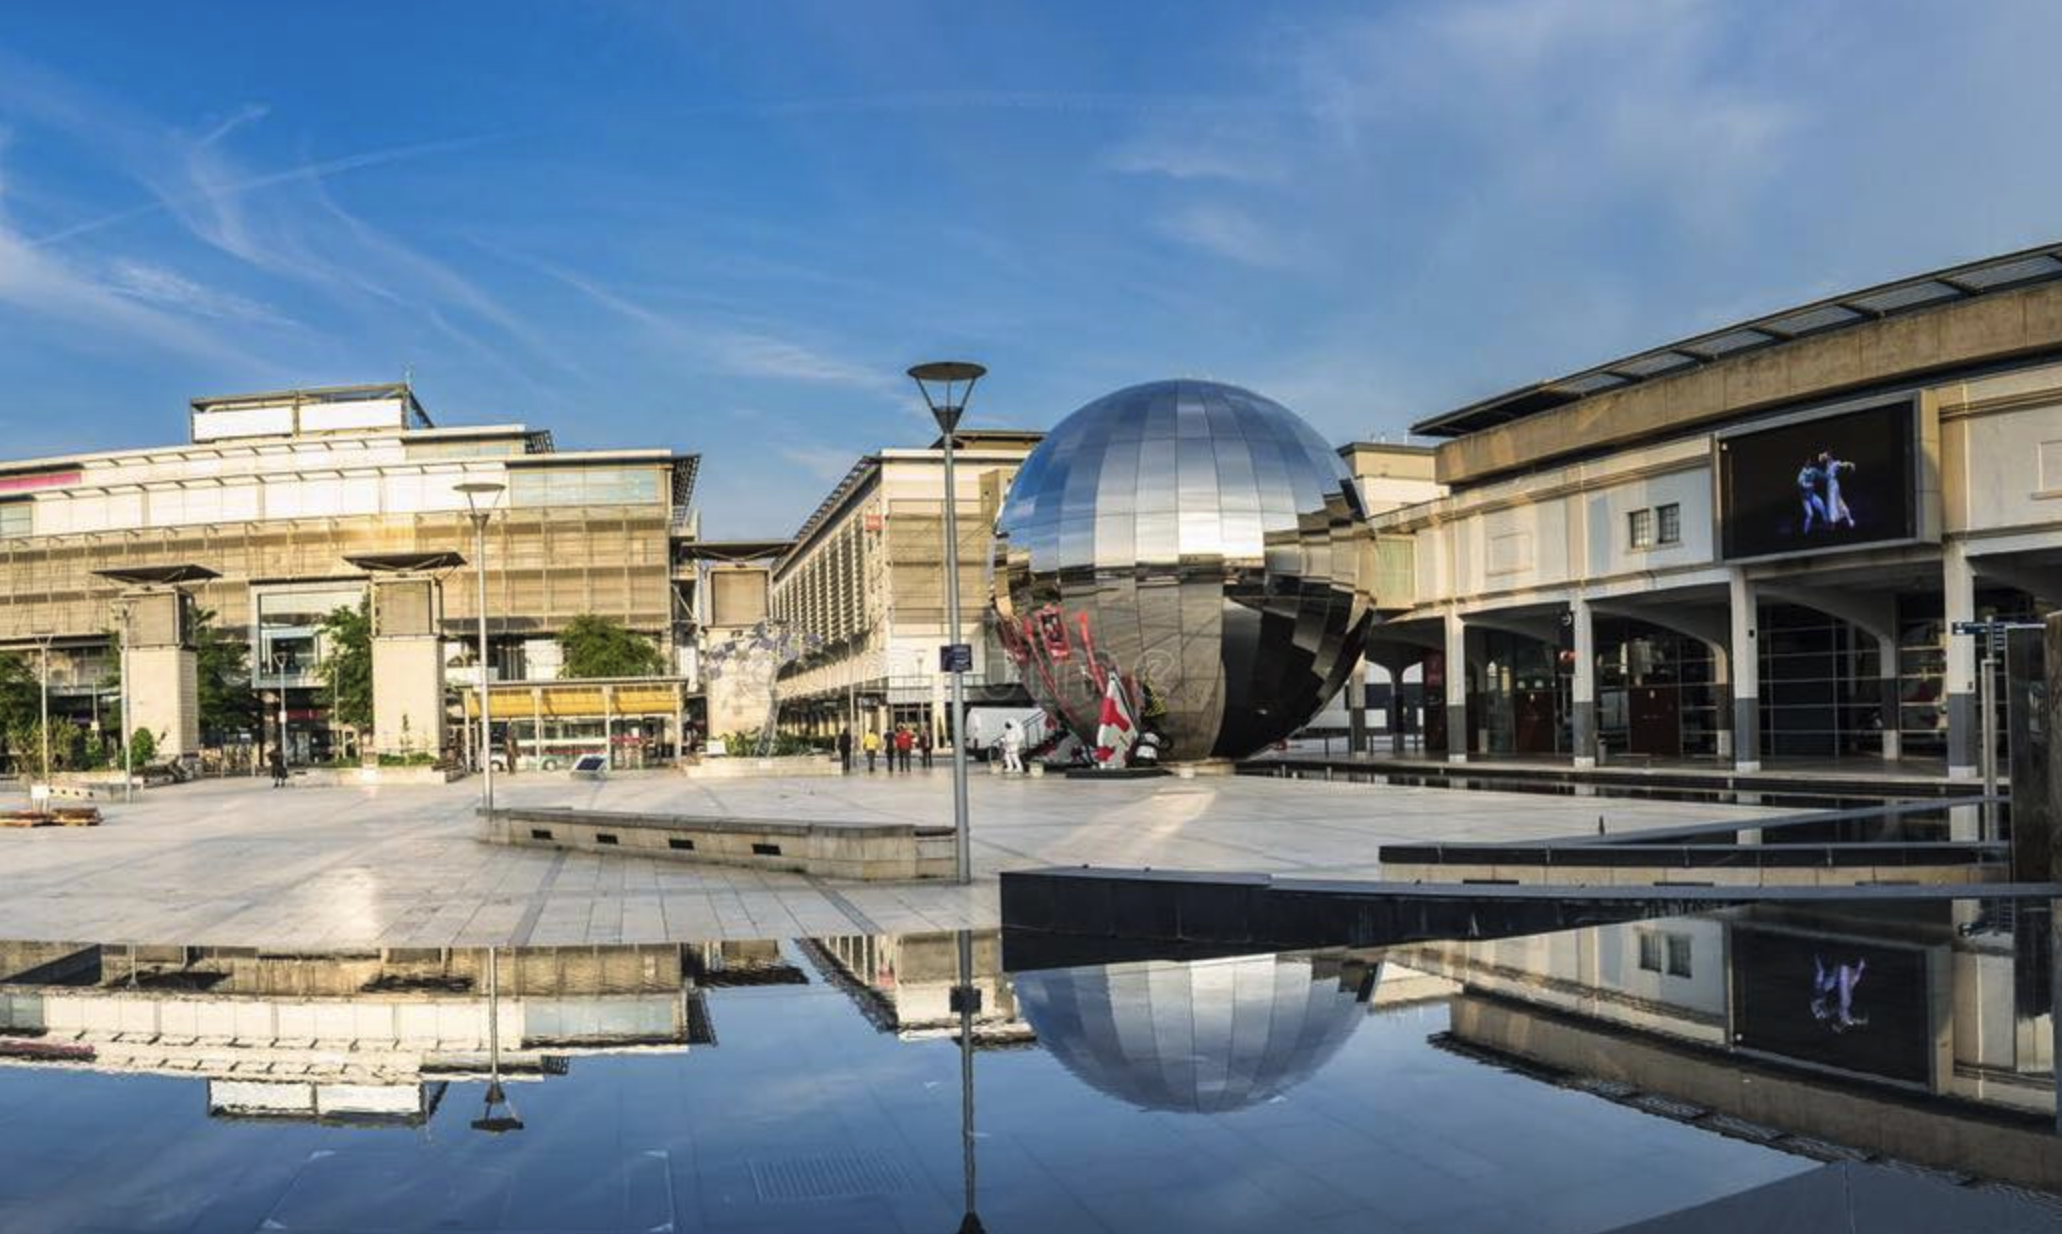 Image of an urban plaza with modern buildings surrounding a large, reflective, spherical structure at its center. The sky is blue with few clouds, and there's a clear reflection of the scene on a shallow body of water in the foreground.